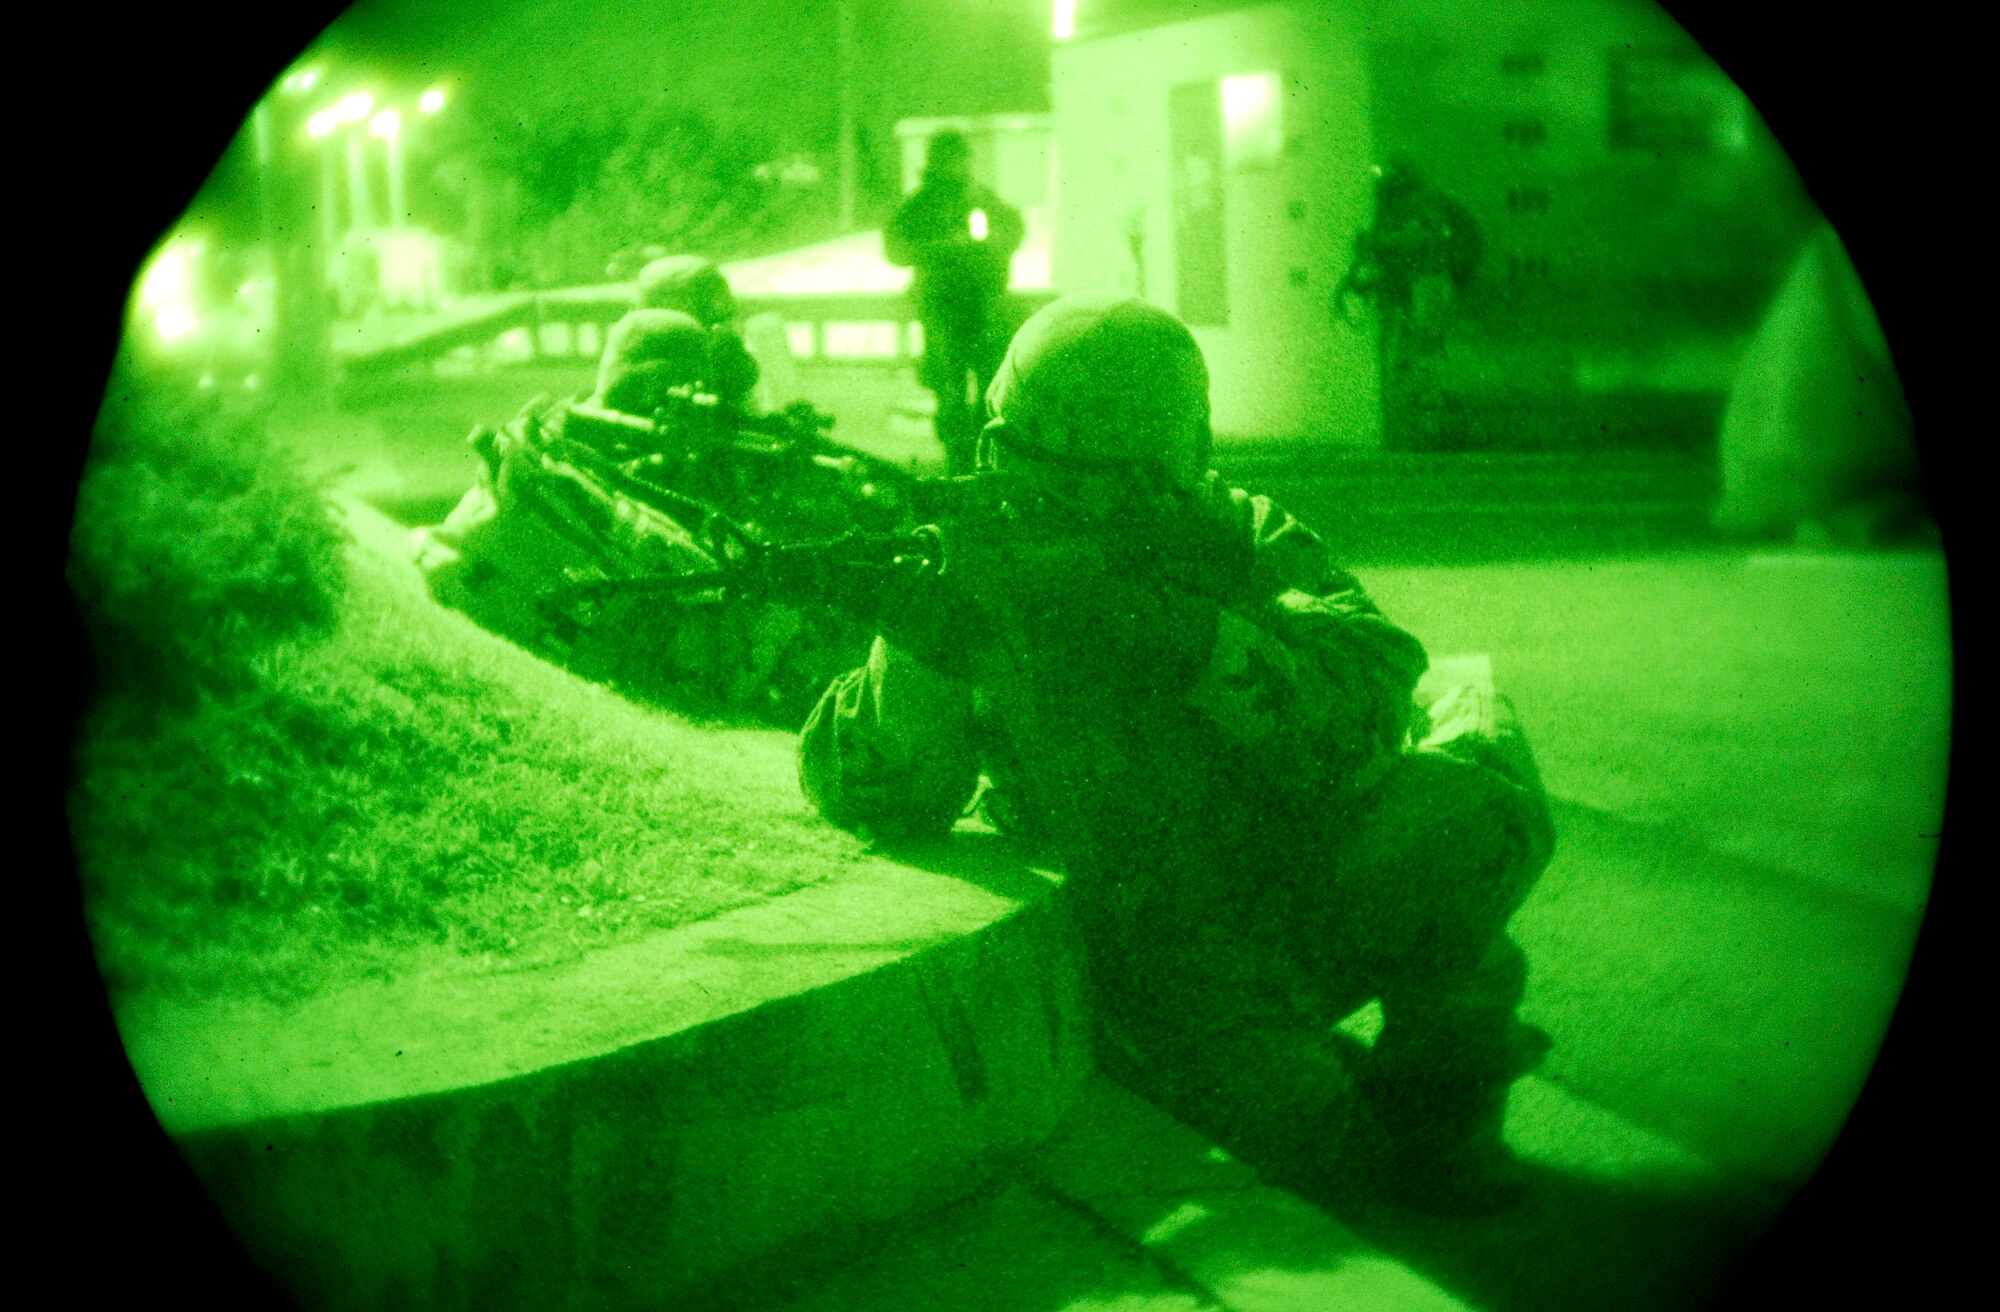 Airmen from the 51st Security Forces Squadron fight off "opposing forces" during a night training exercise Nov. 3, 2009, Osan Air Base, South Korea. (U.S. Air Force photo/Staff Sgt. Brian Ferguson)